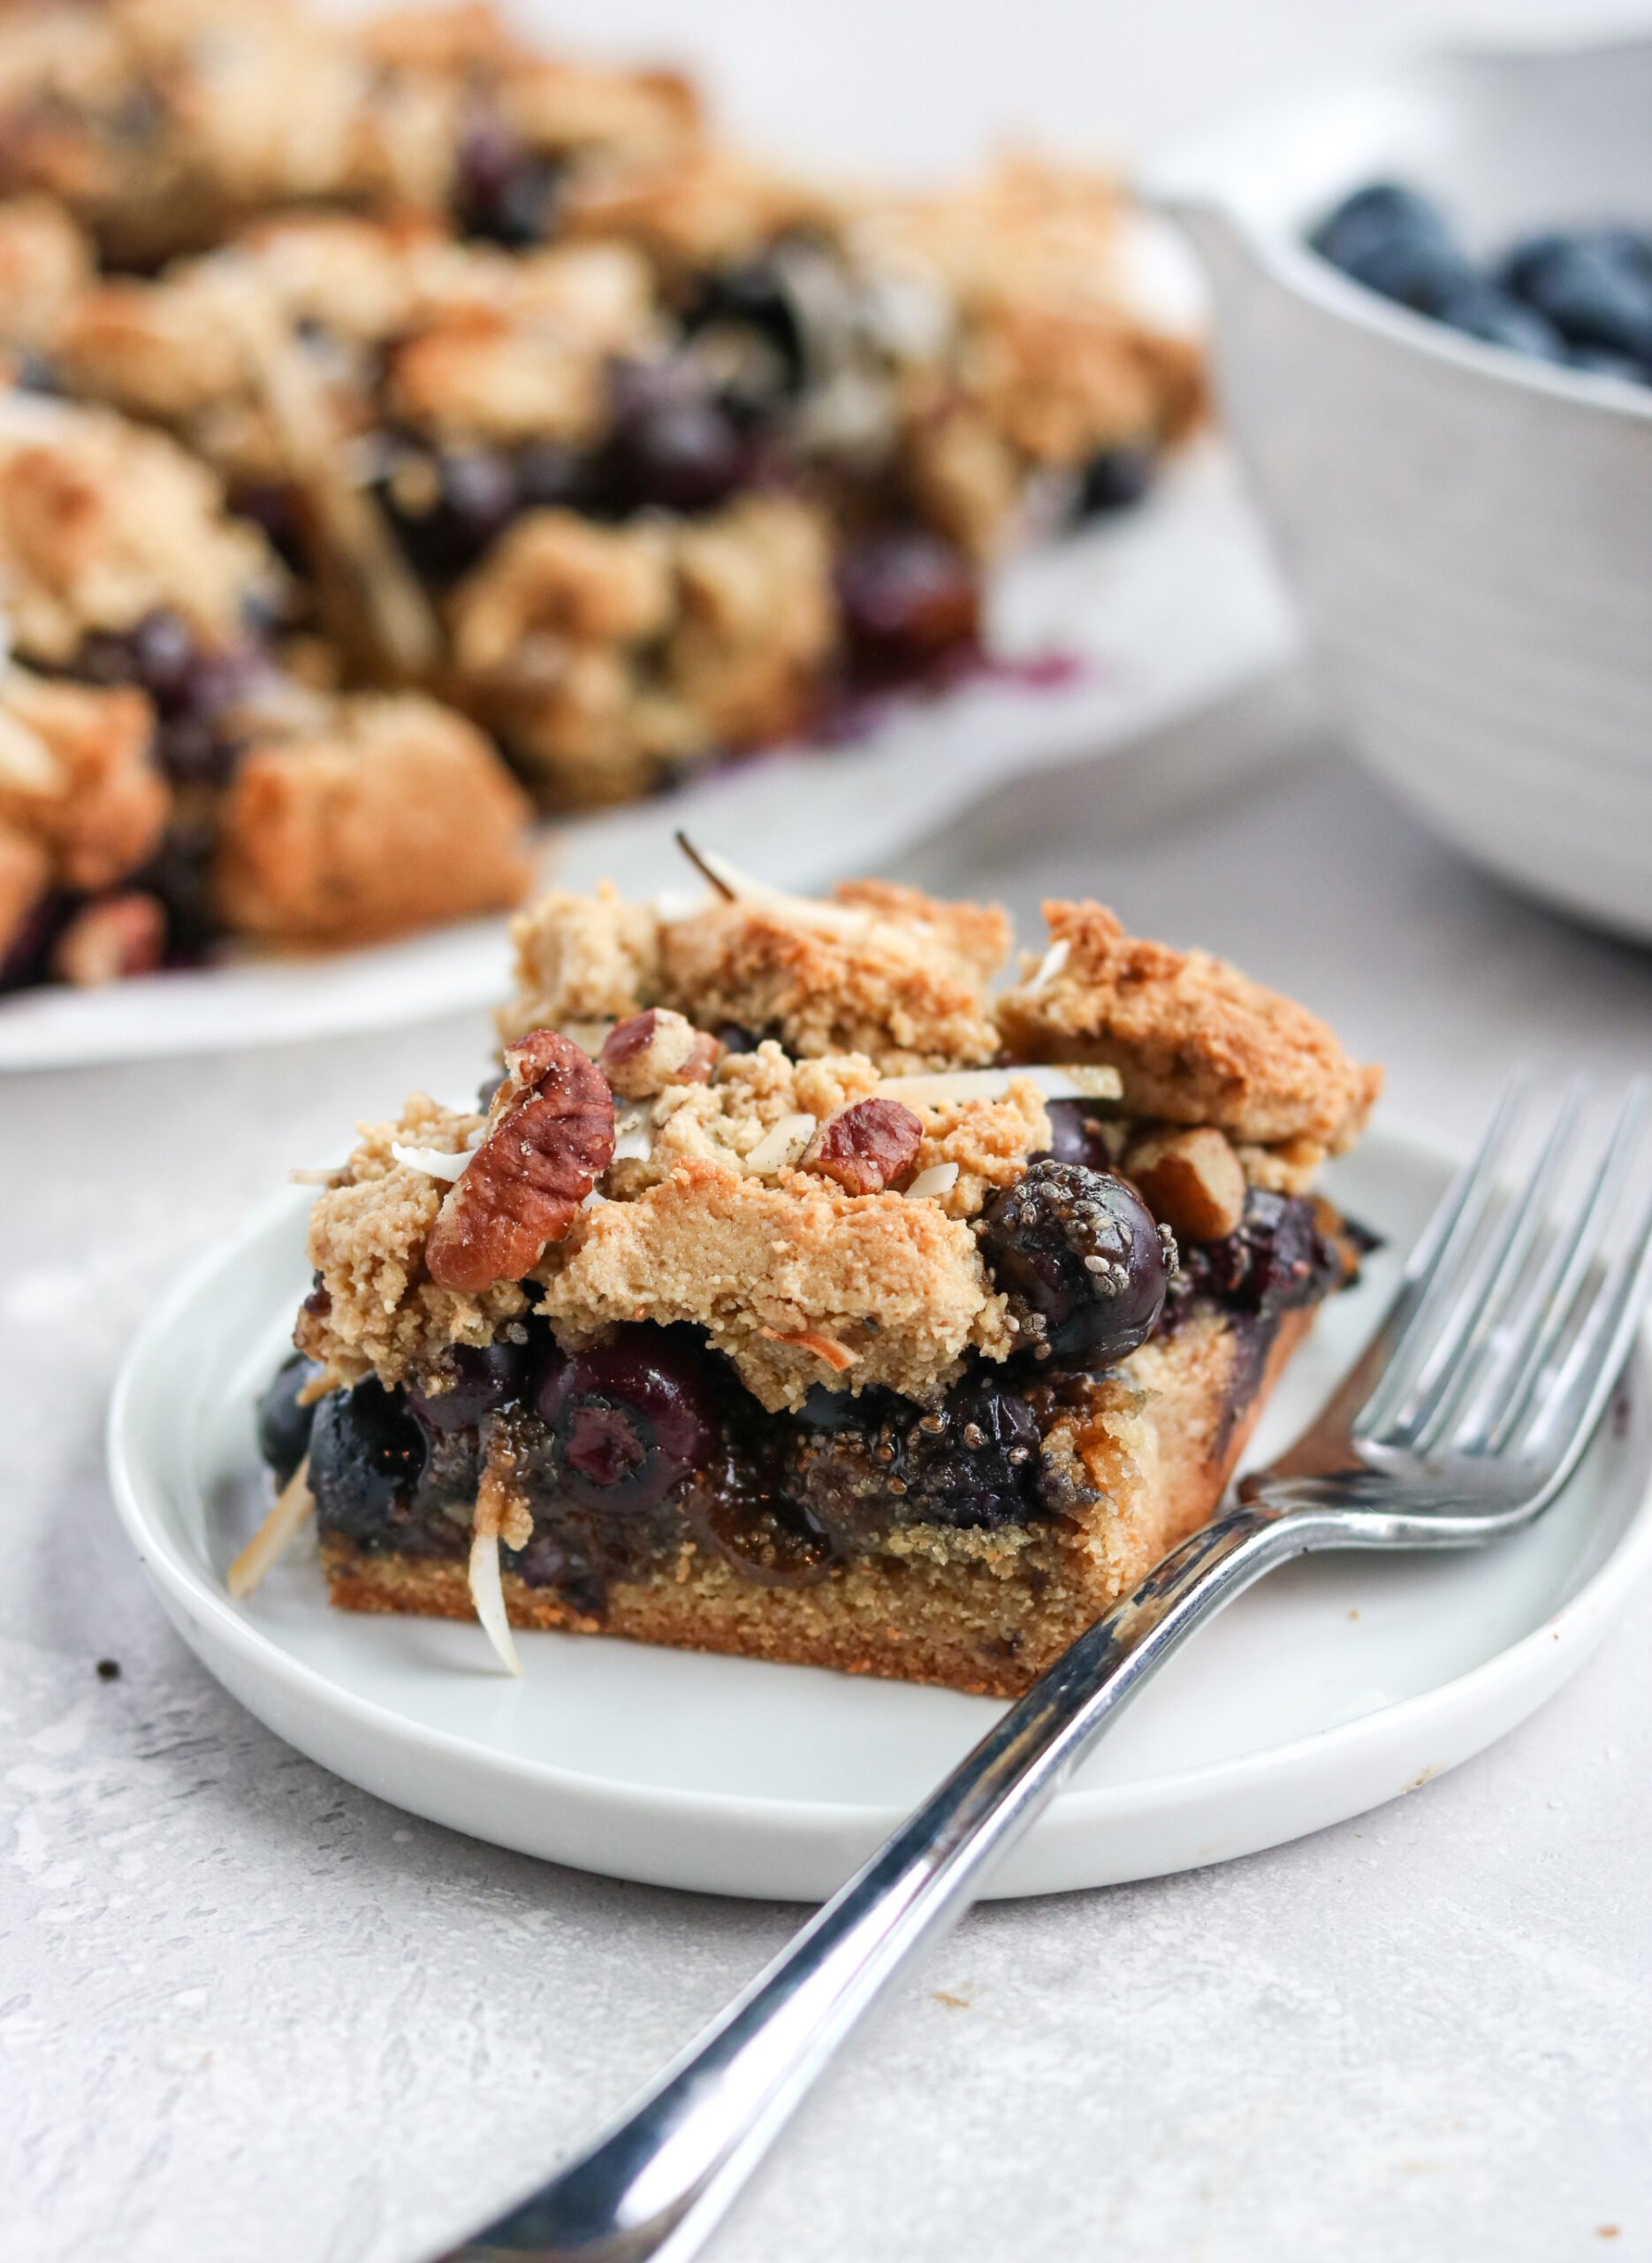 Crumb Bar made of Blueberry in a white plate with fork